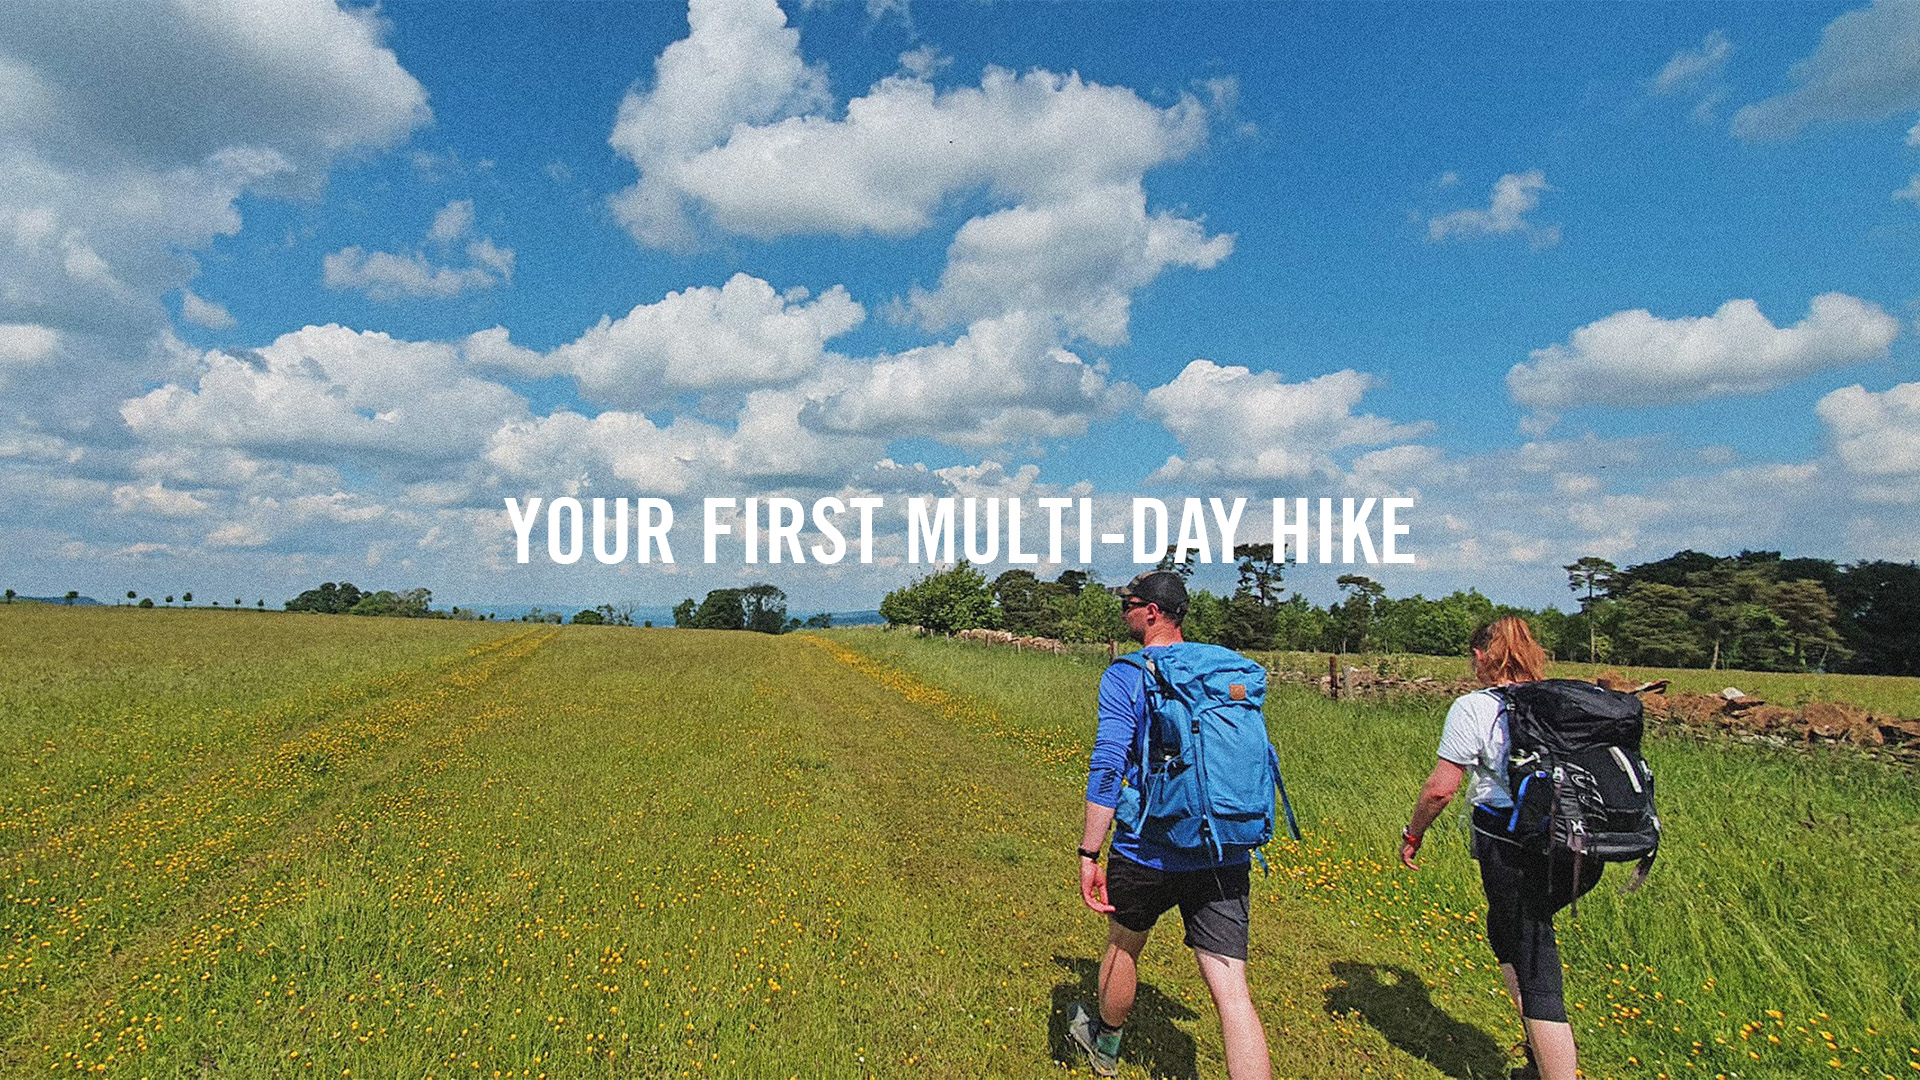 What to Expect From Your First Multi-Day Hike